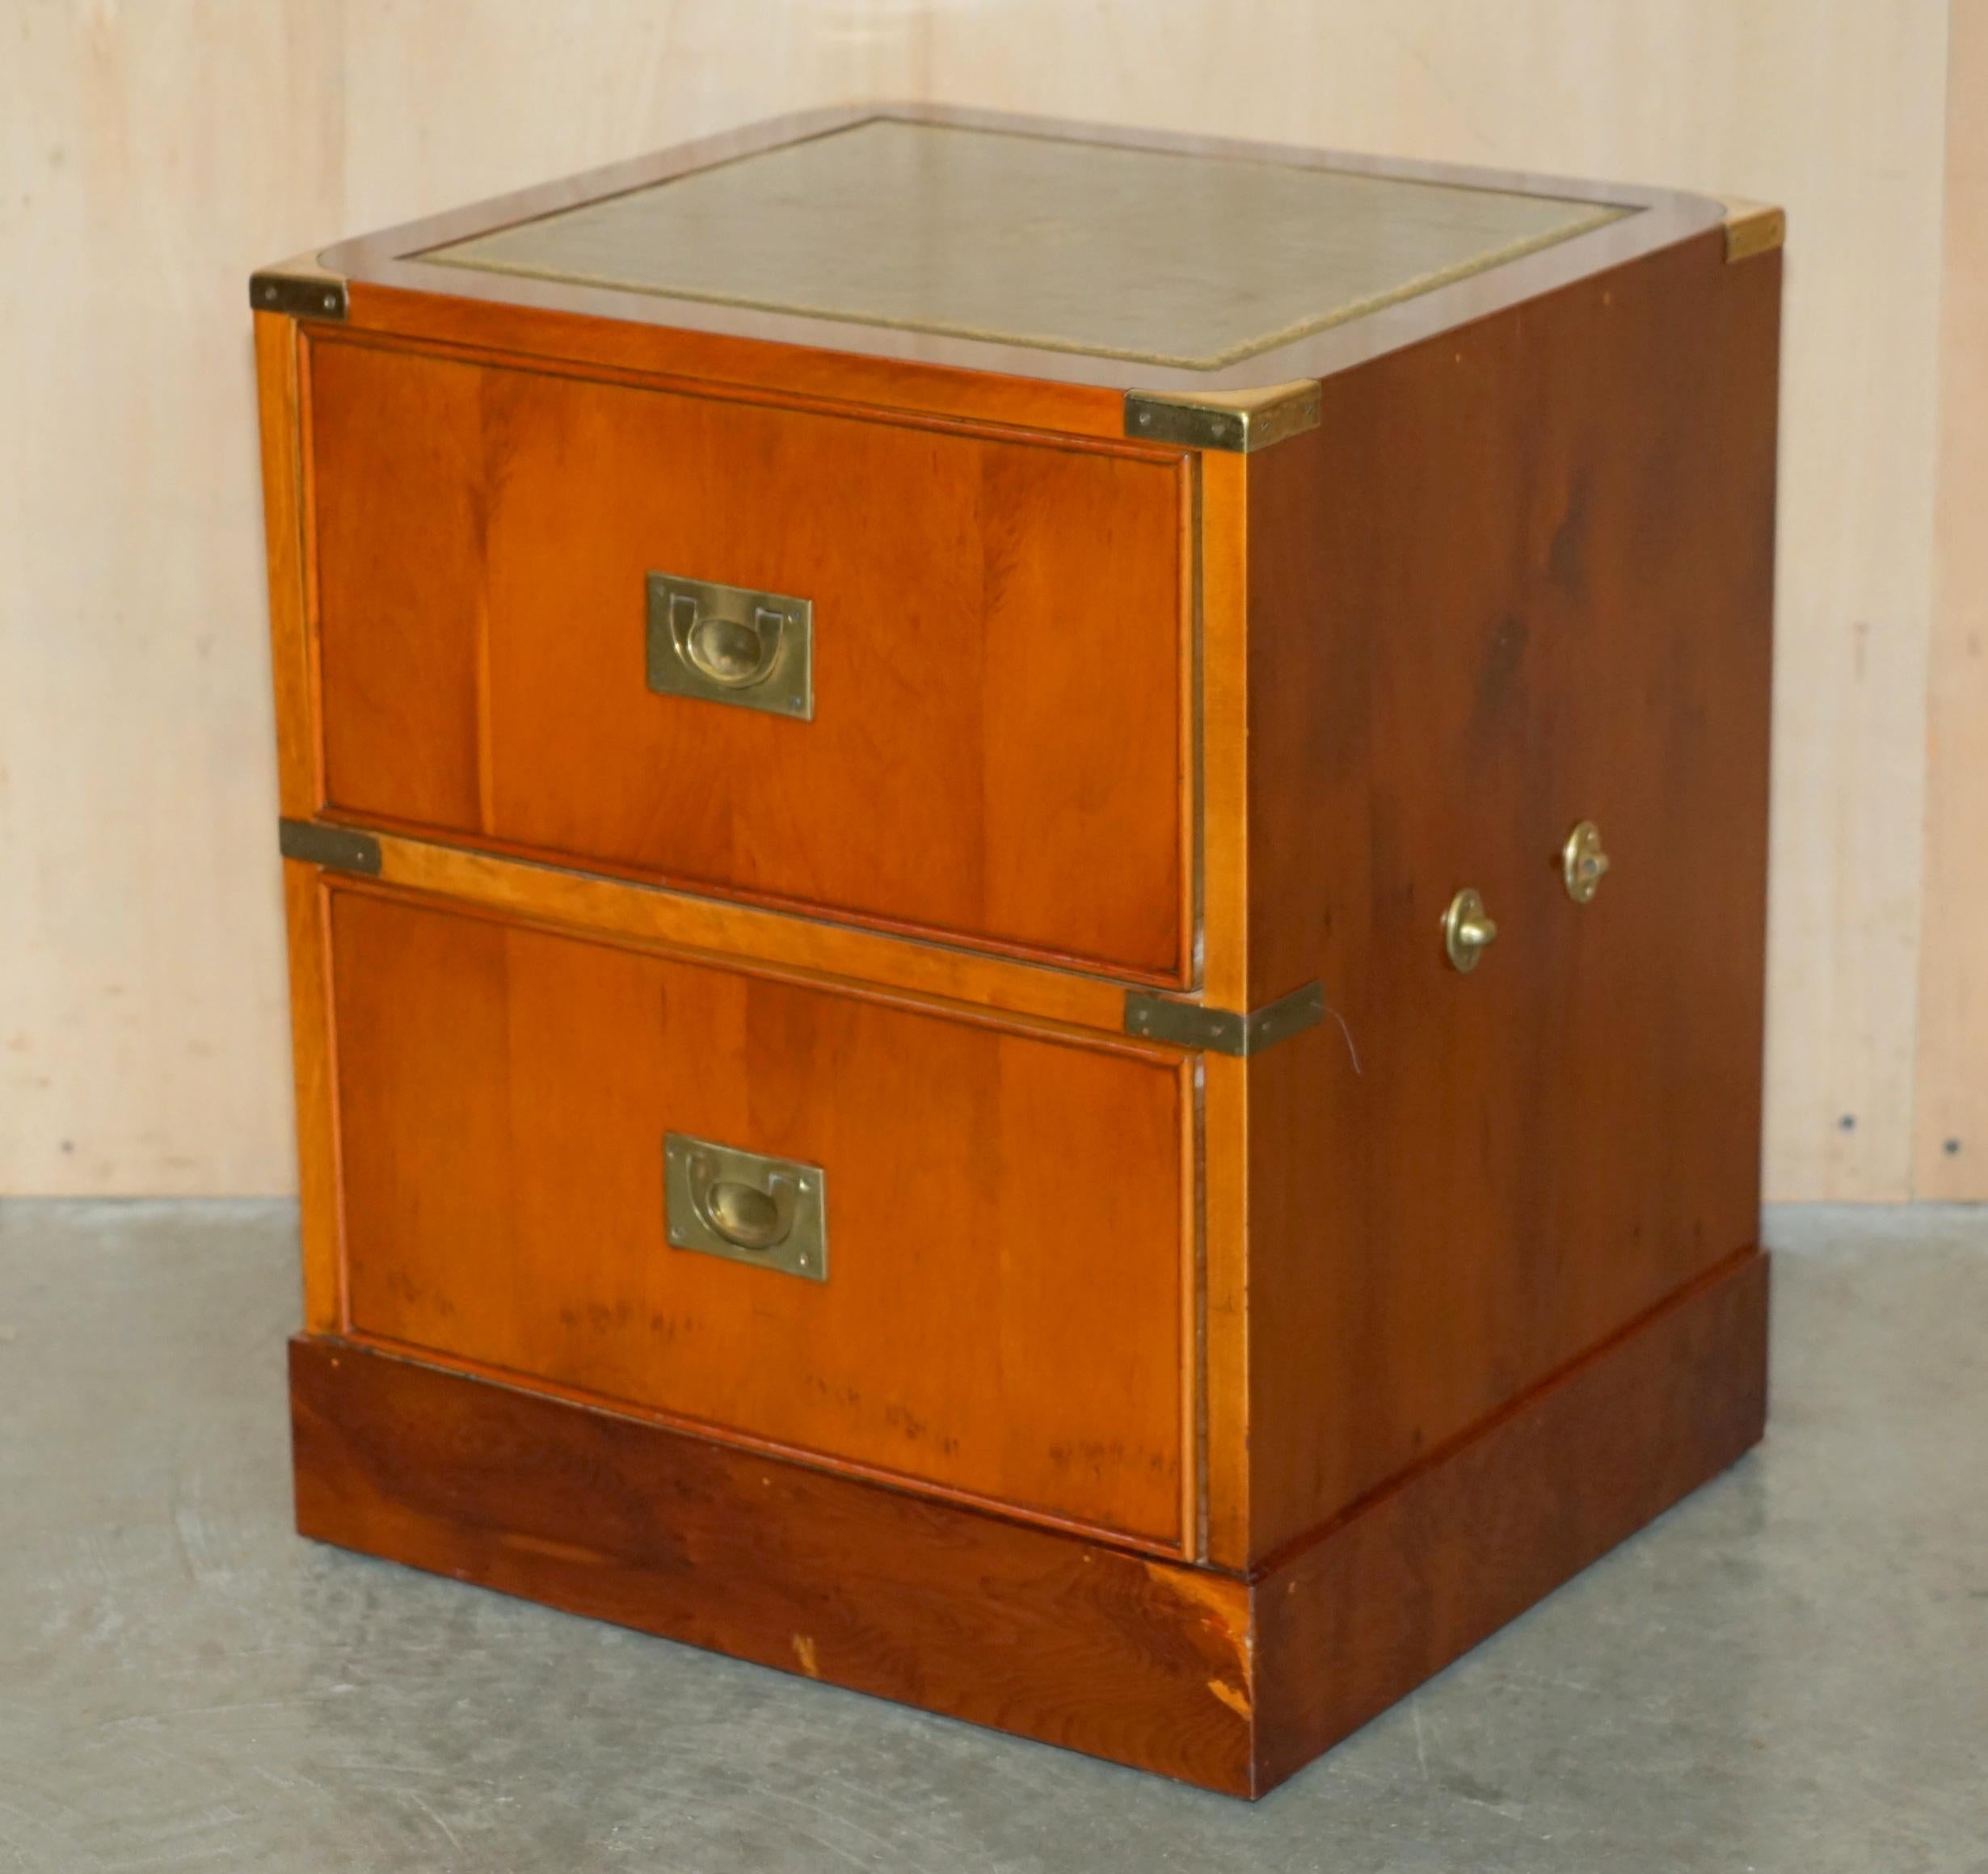 Royal House Antiques

Royal House Antiques is delighted to offer for sale this sublime pair of vintage Bevan Funnell Military Campaign side tables with drawers and green leather tops in Burr Yew wood

Please note the delivery fee listed is just a